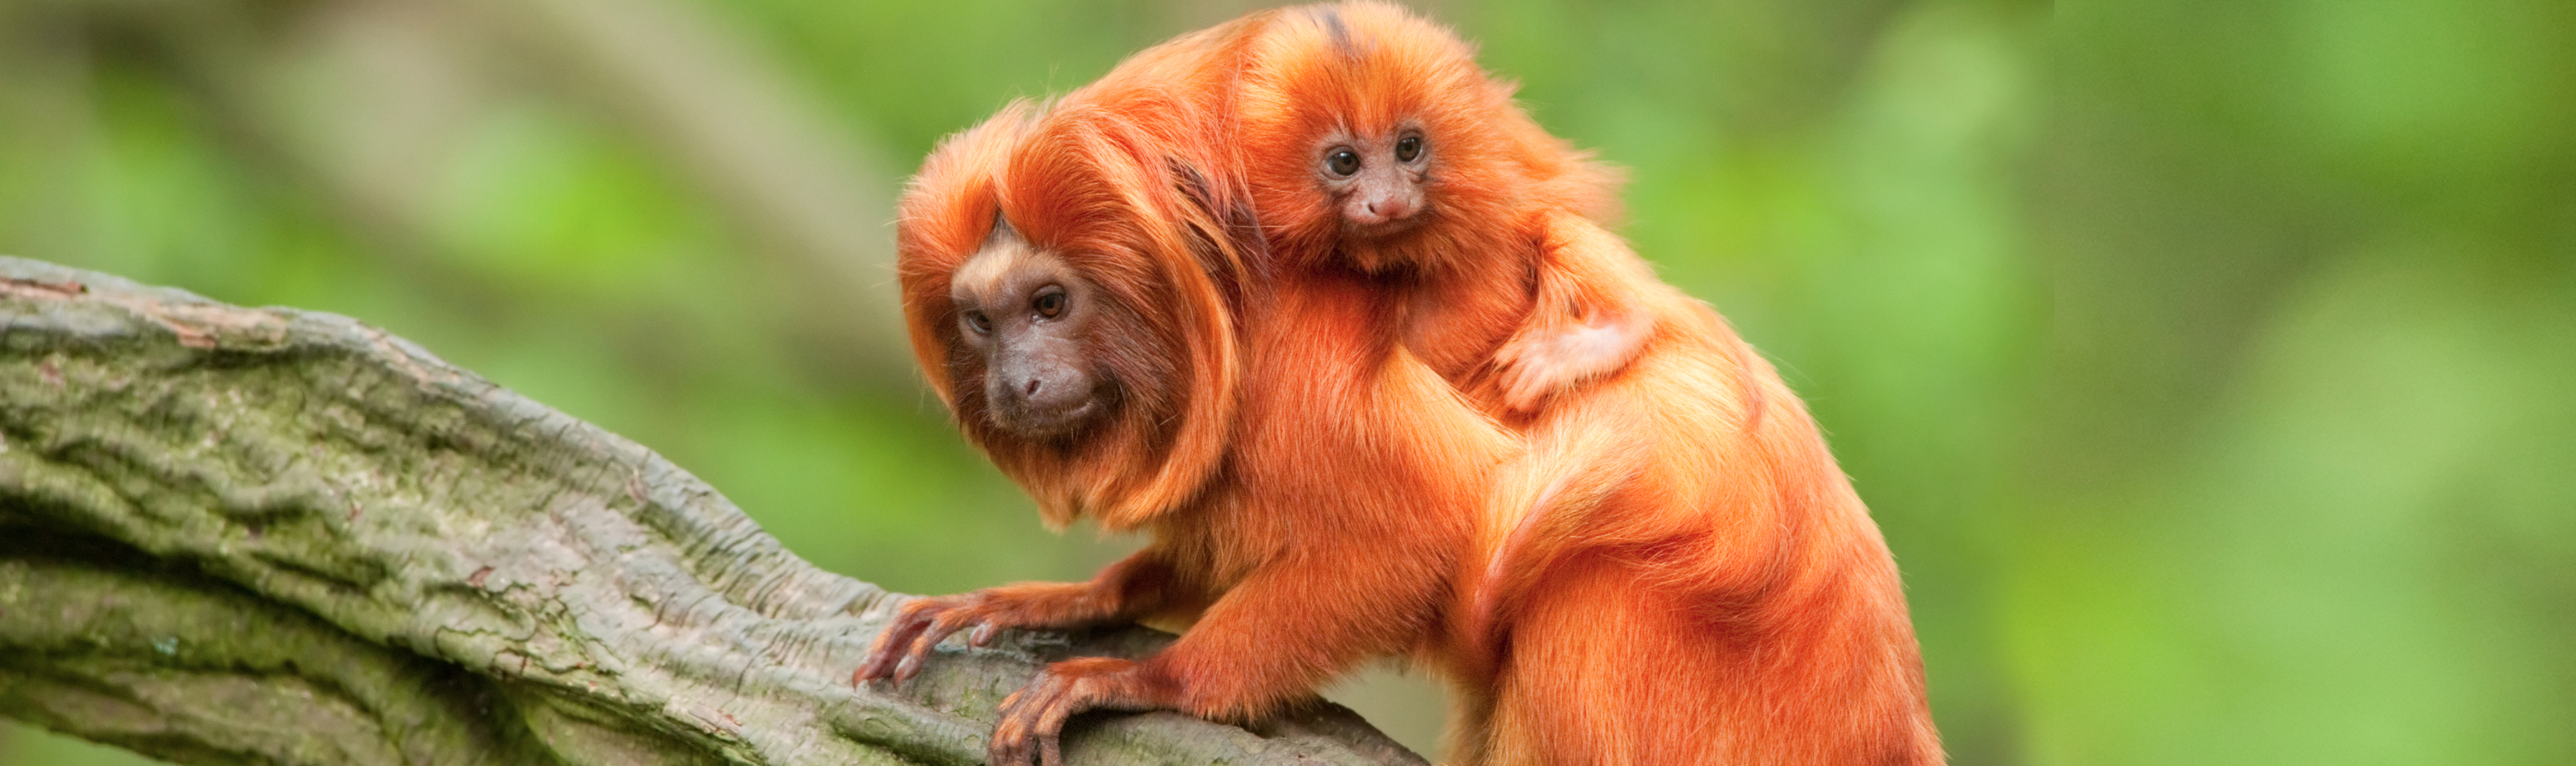 Tamarin Backgrounds, Compatible - PC, Mobile, Gadgets| 3680x1095 px